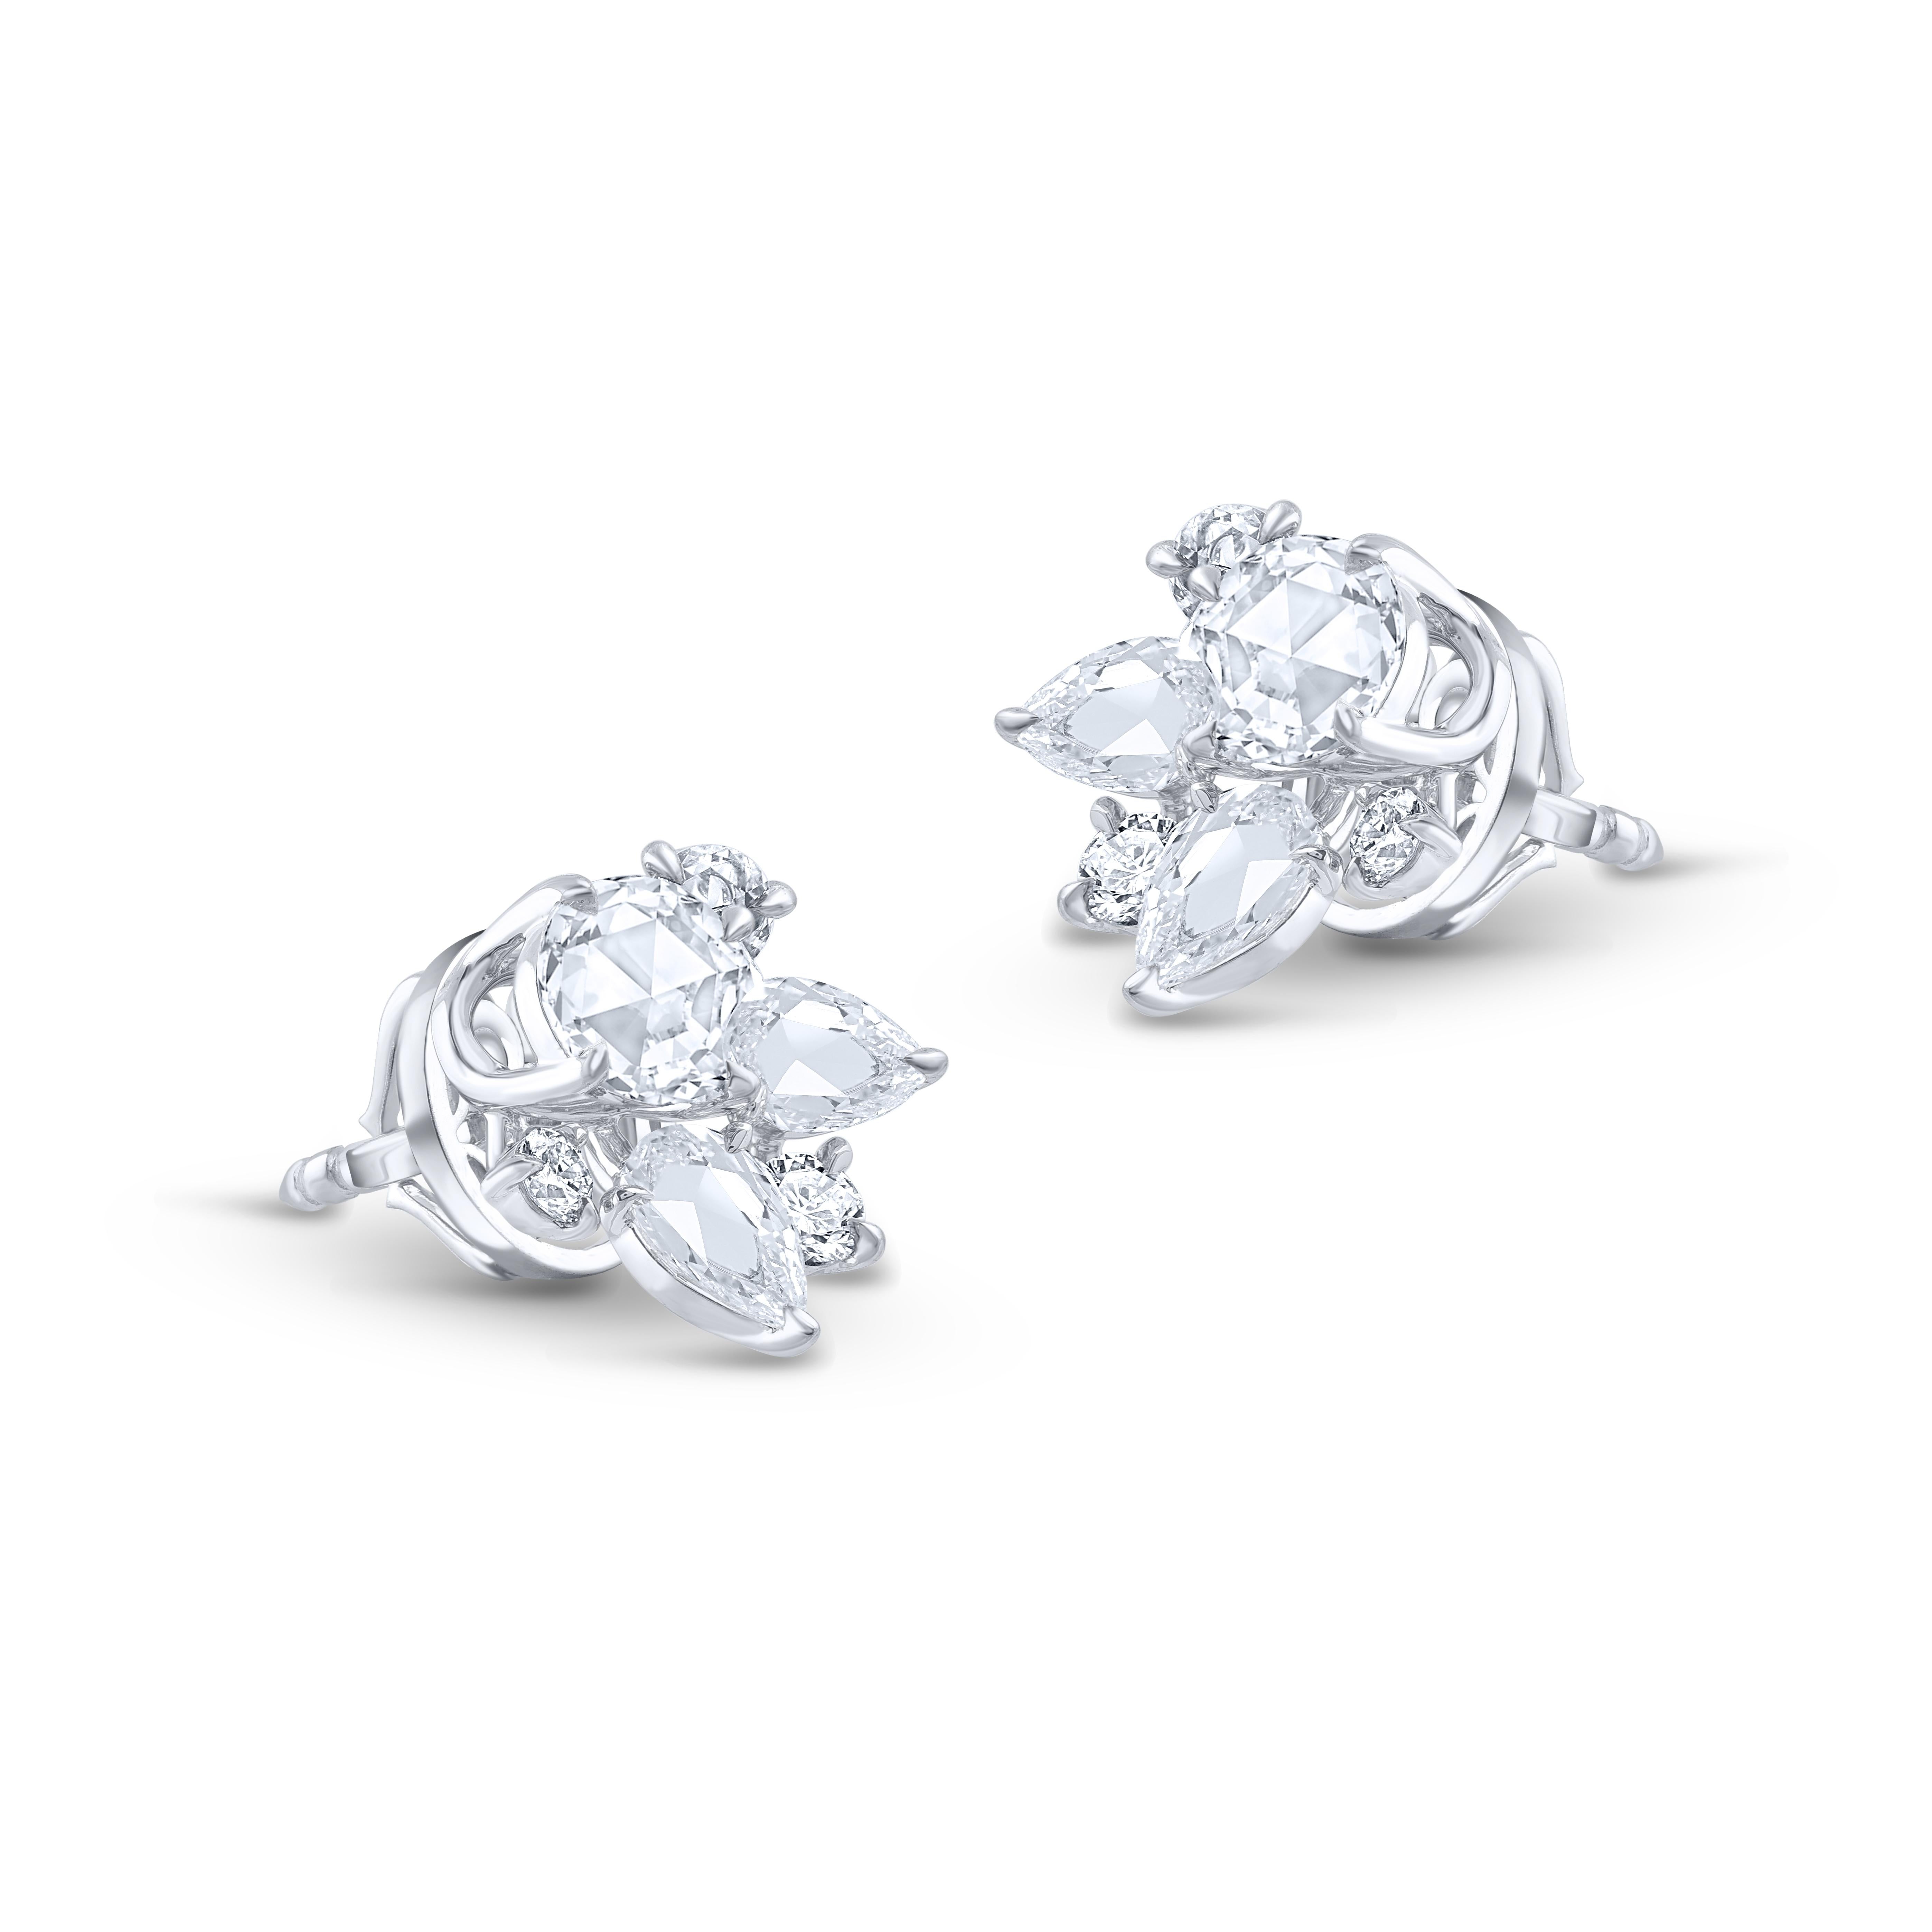 A brilliant cluster of colorless diamonds crafted meticulously to make these stud earrings. Studded with 4 round, 4 baguette, 2 pear, 4 rose cut round, 2 rose cut marquise diamonds. All the diamonds are D-F color, IF-VS clarity, the total diamond